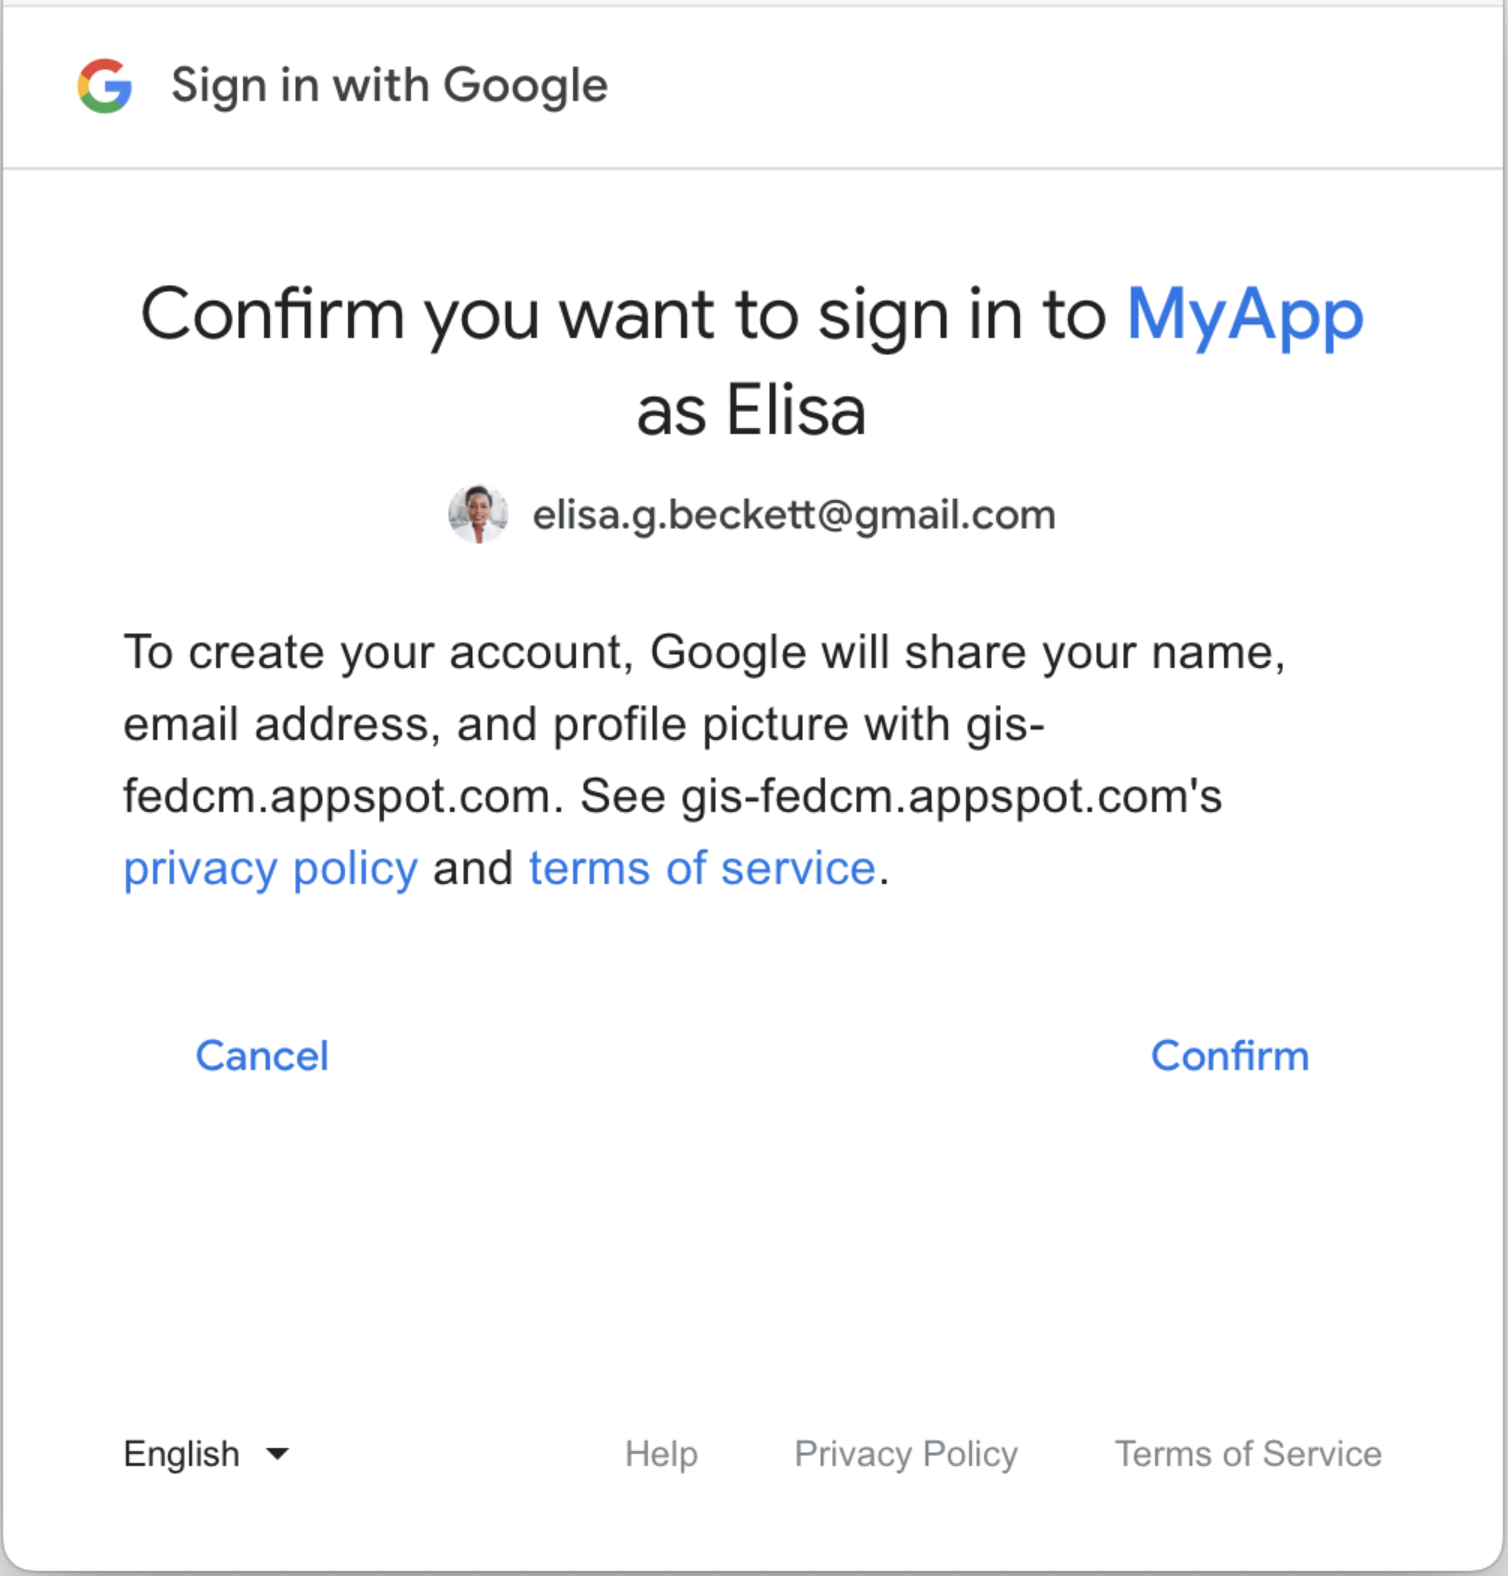 Sign In With Google button consent and sign-in.